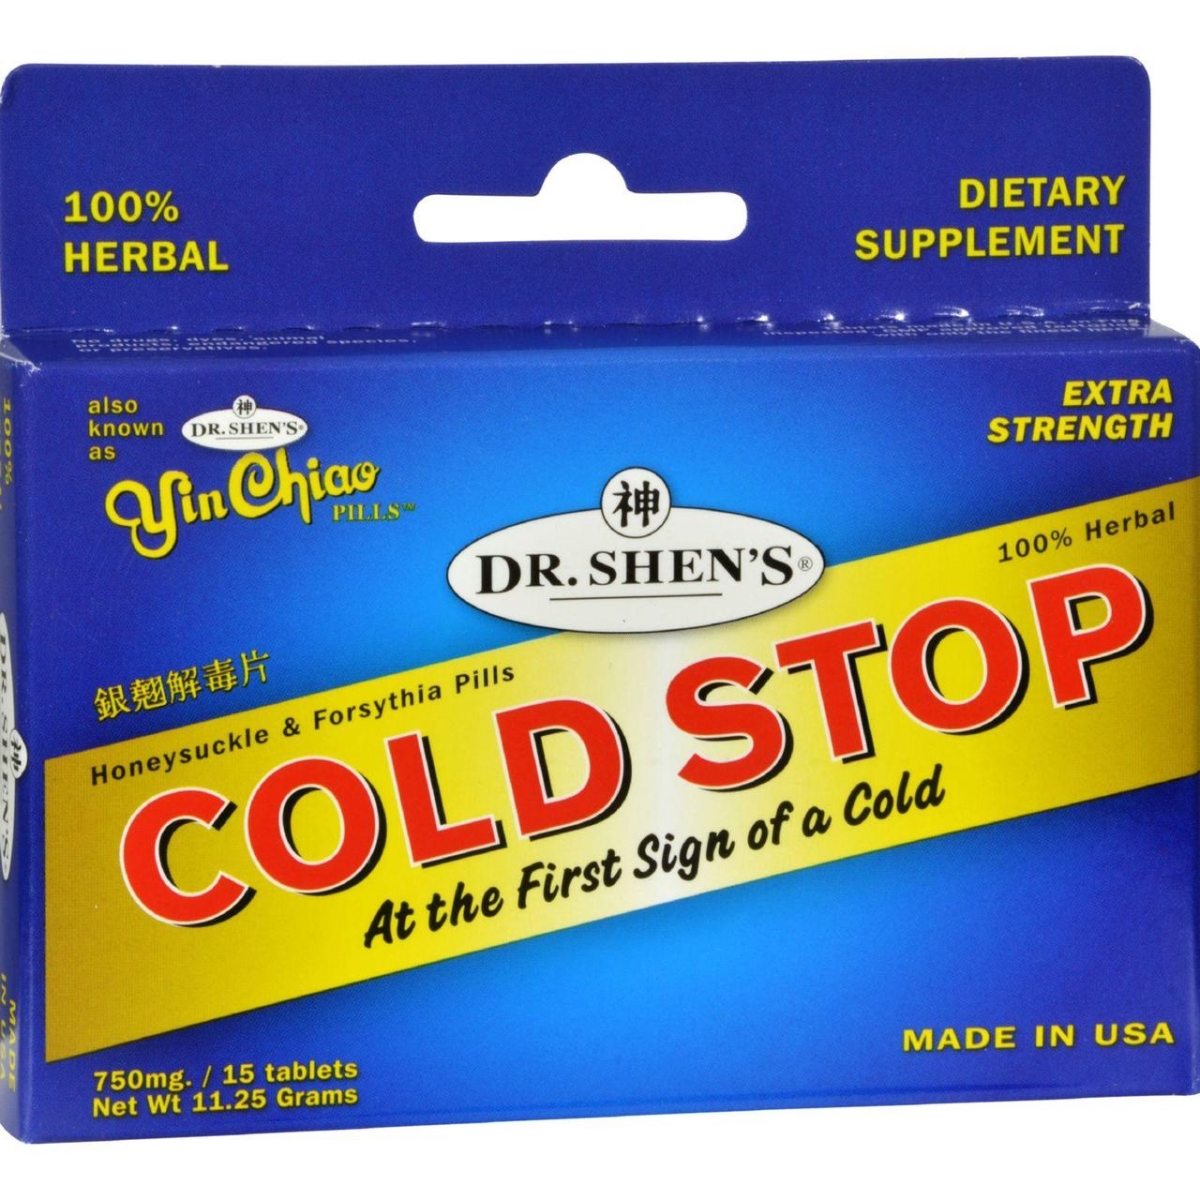 Hg0612218 Yin Chiao Coldstop Cold Or Flu - 15 Tablets